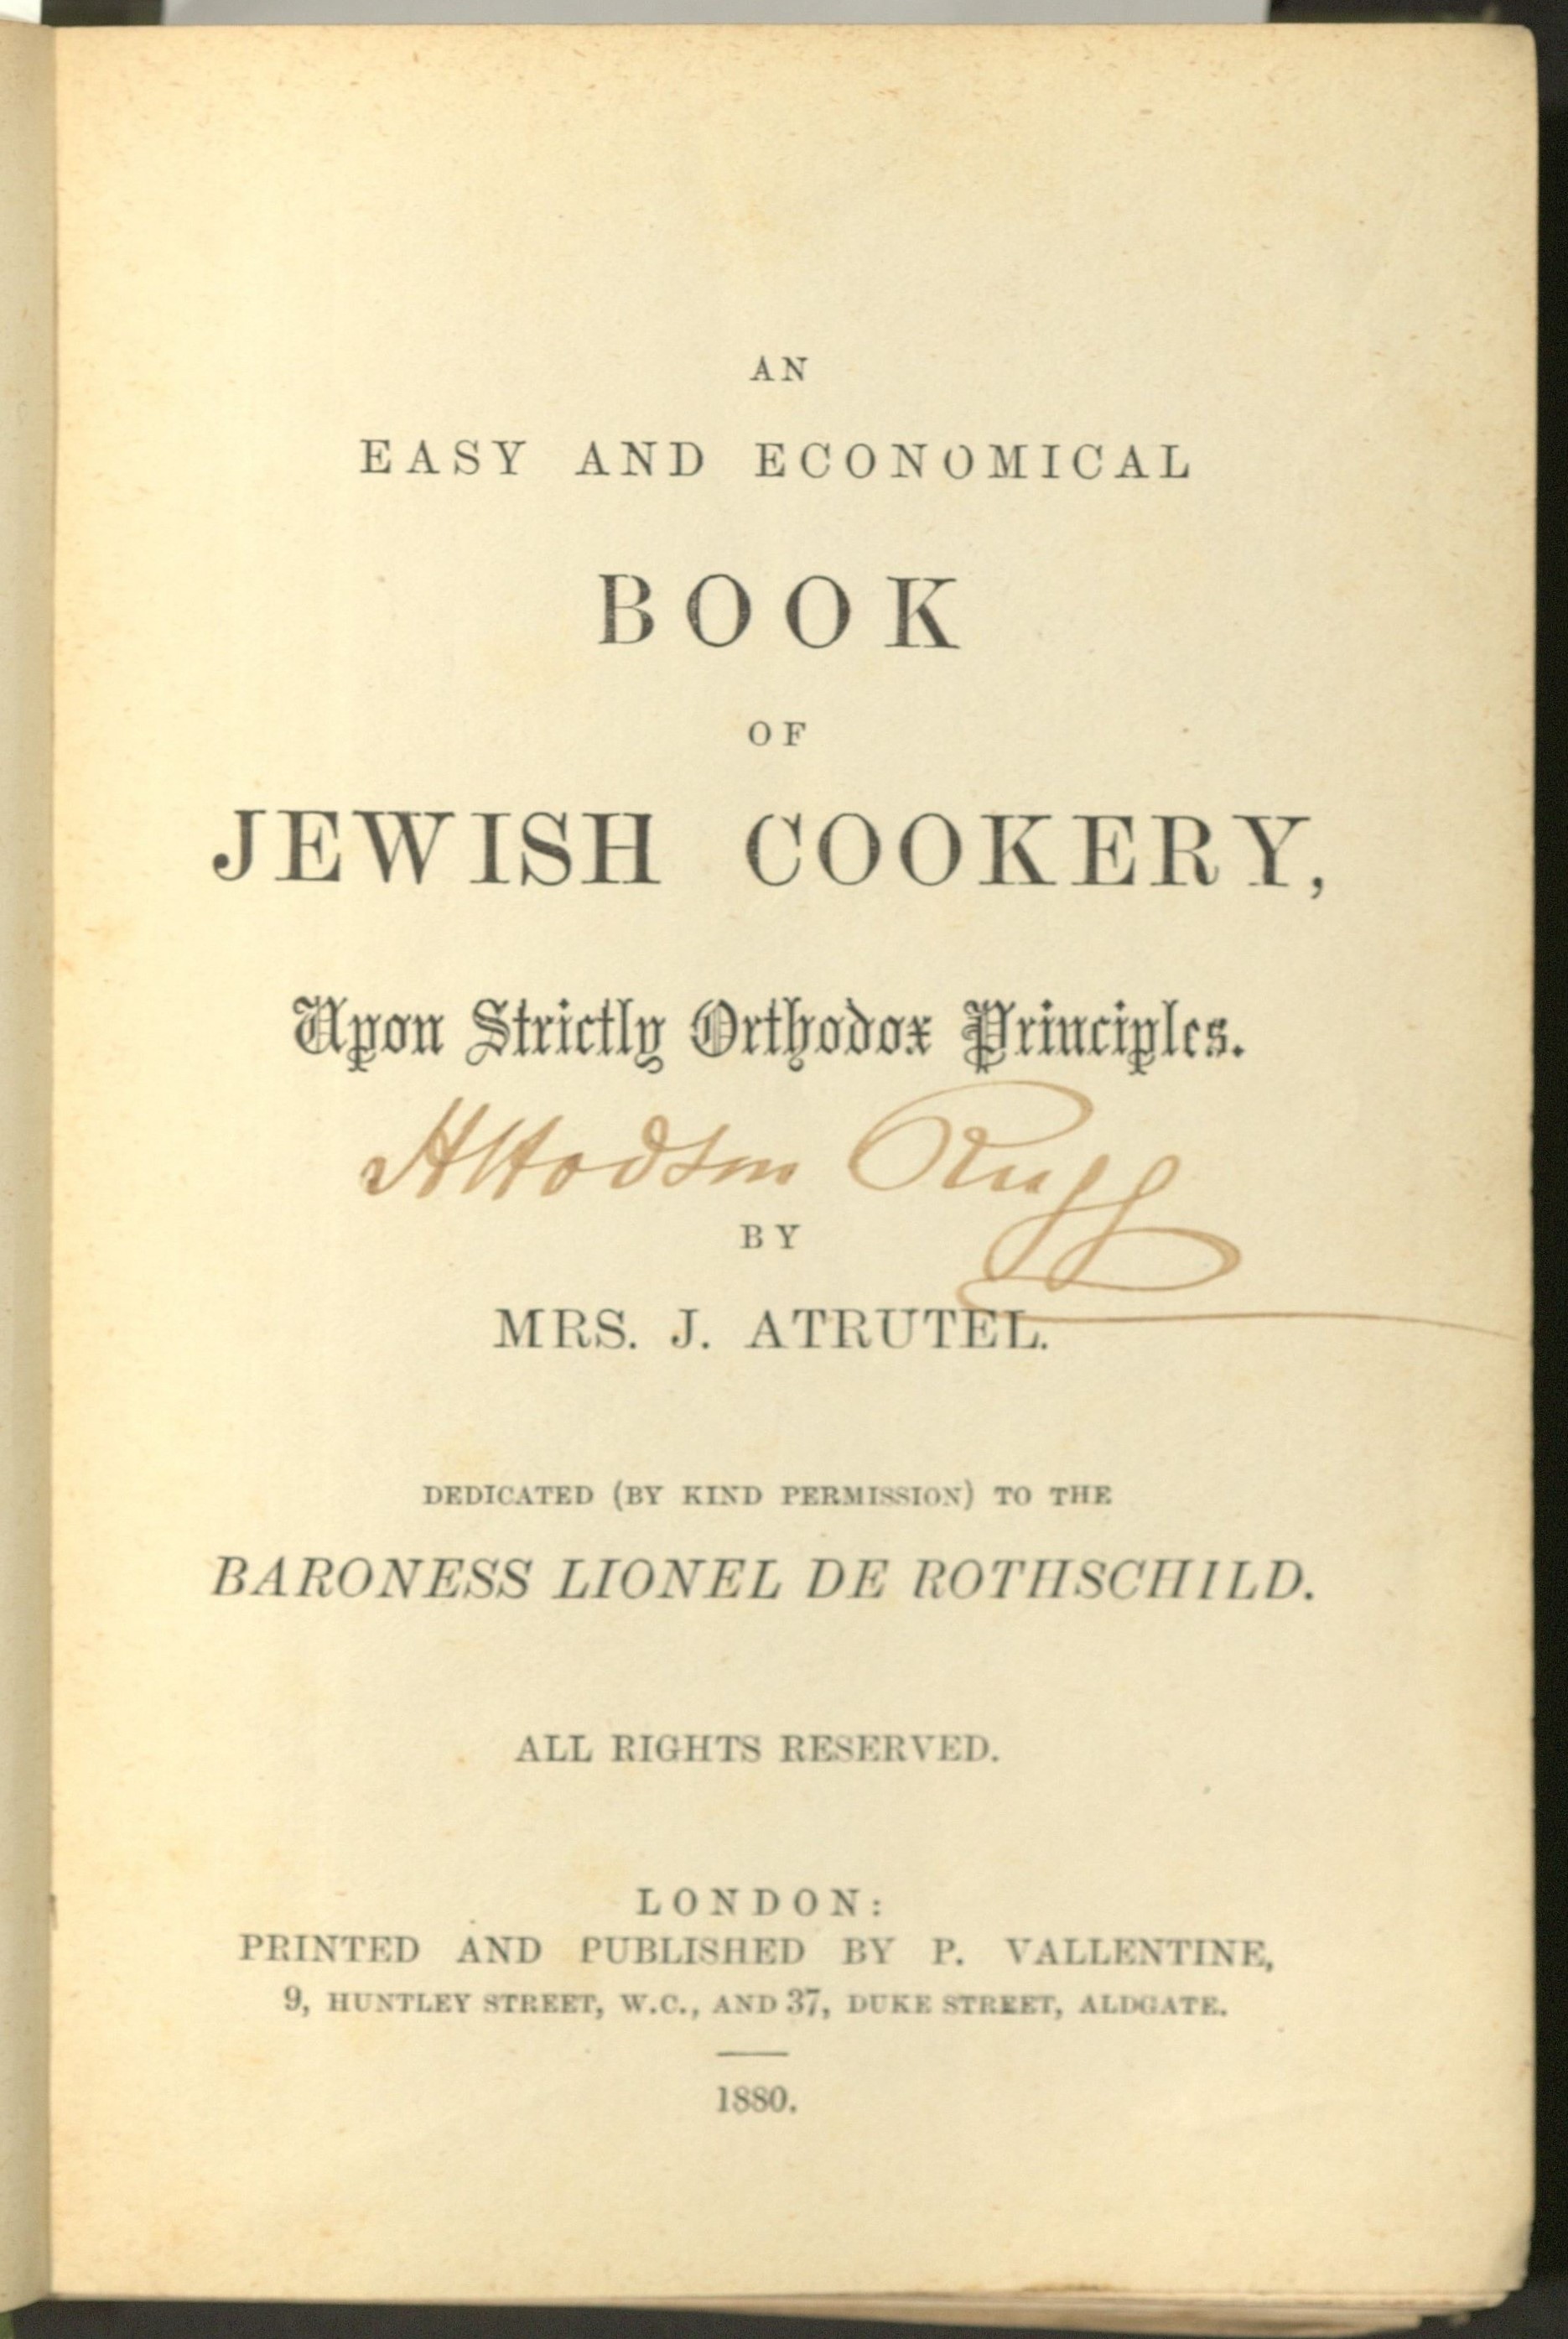 Title page of book using several different type faces. in black on slightly browned paper. An indecipherable signature (probably not the author) in faded brown ink appears under the title.